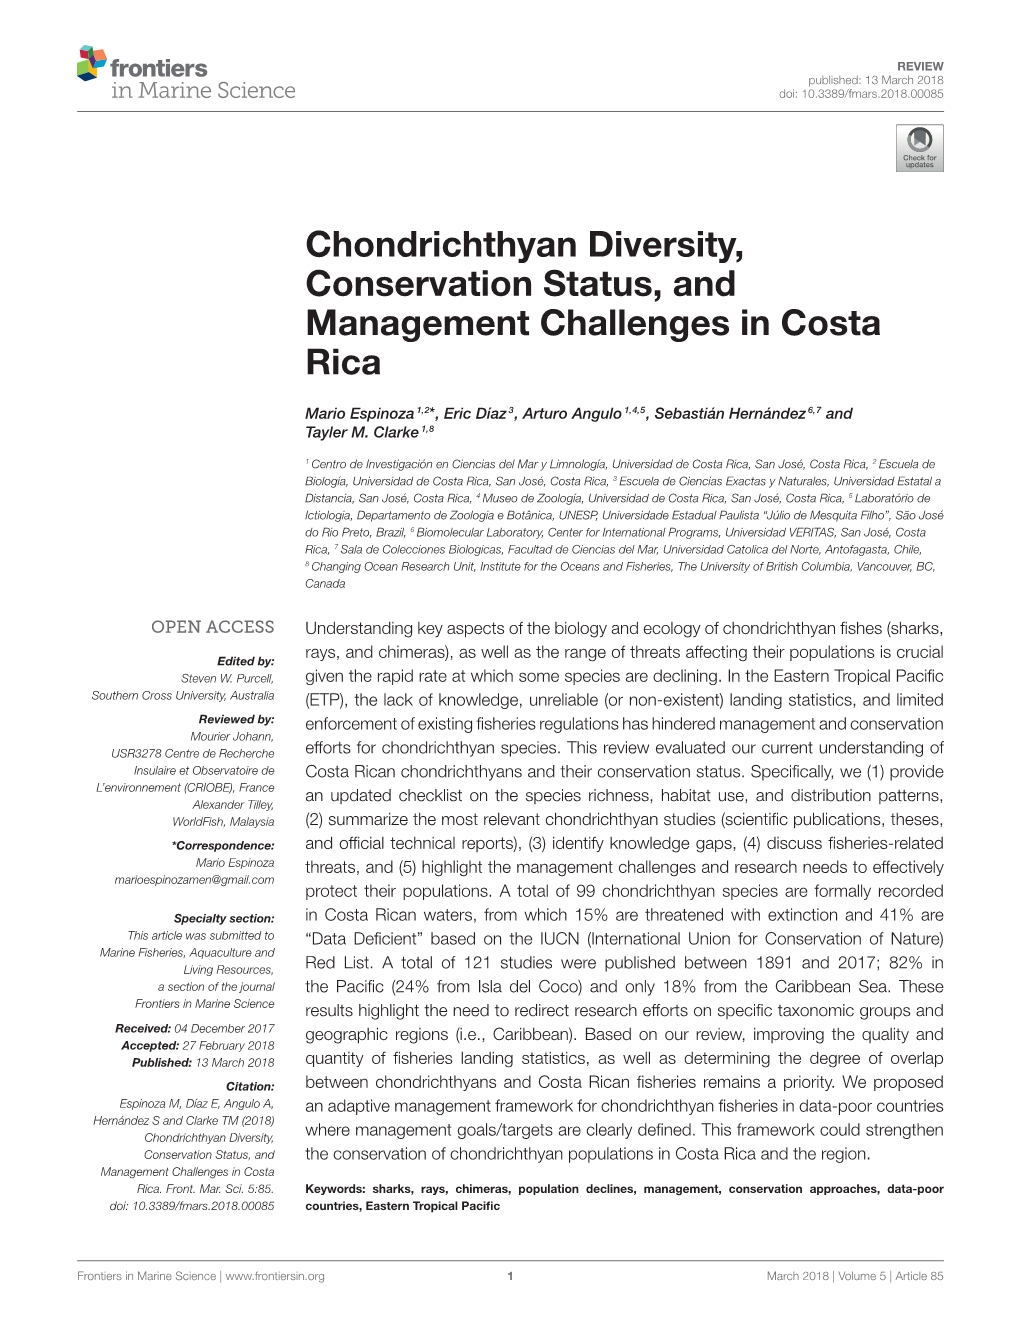 Chondrichthyan Diversity, Conservation Status, and Management Challenges in Costa Rica